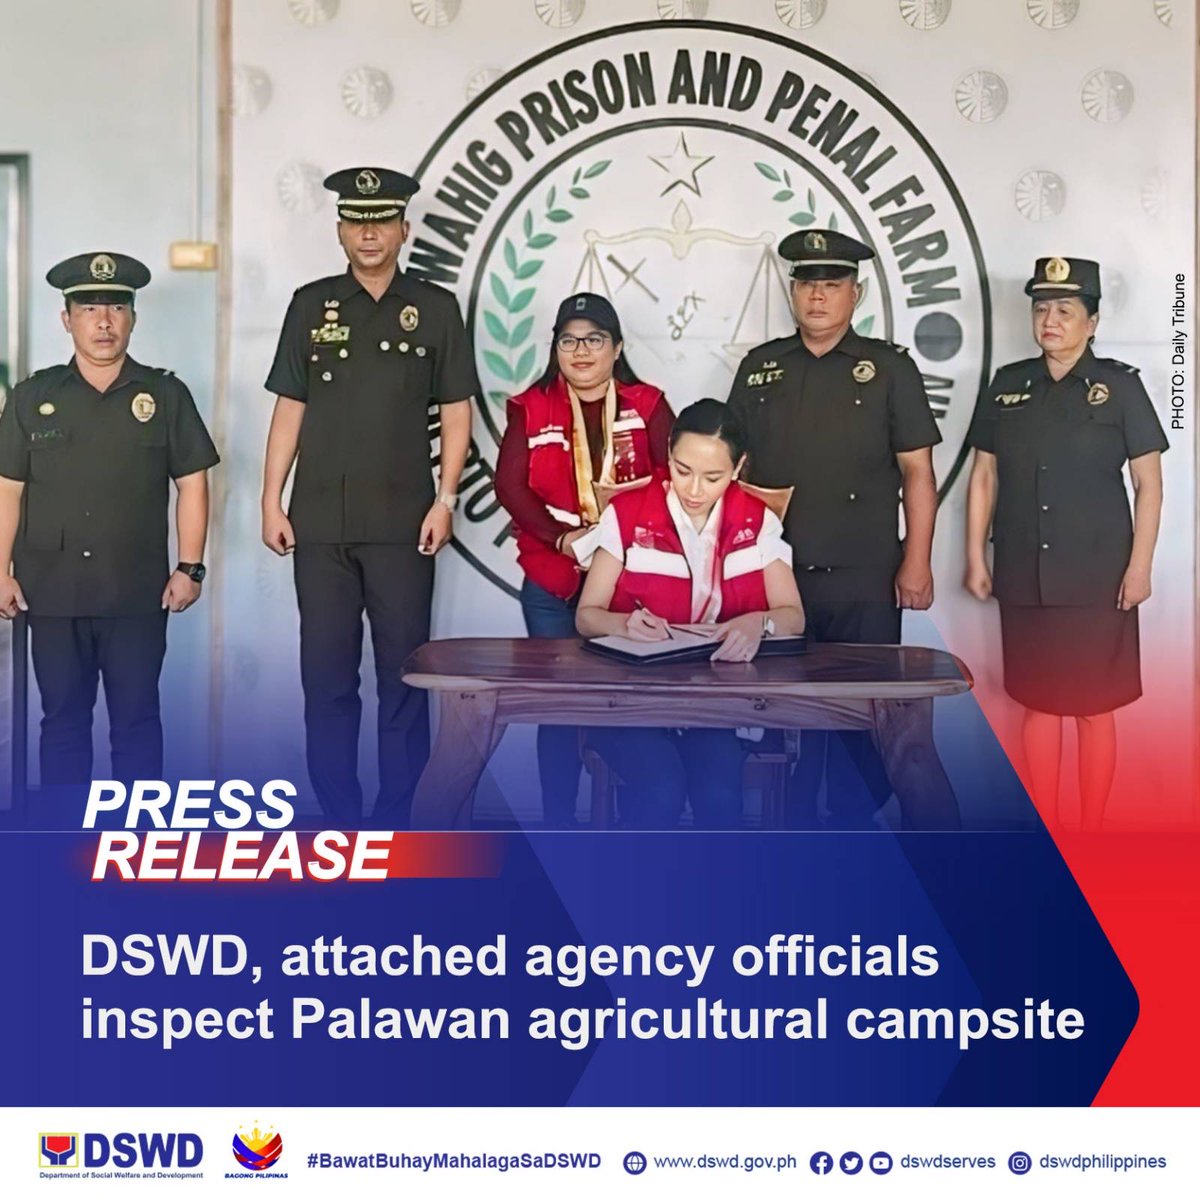 𝗗𝗦𝗪𝗗 𝗣𝗥𝗘𝗦𝗦 𝗥𝗘𝗟𝗘𝗔𝗦𝗘: DSWD, attached agency officials inspect Palawan agricultural campsite Senior officials of the Department of Social Welfare and Development (DSWD) and its attached agency, the Juvenile Justice and Welfare Council (JJWC) conducted an ocular…